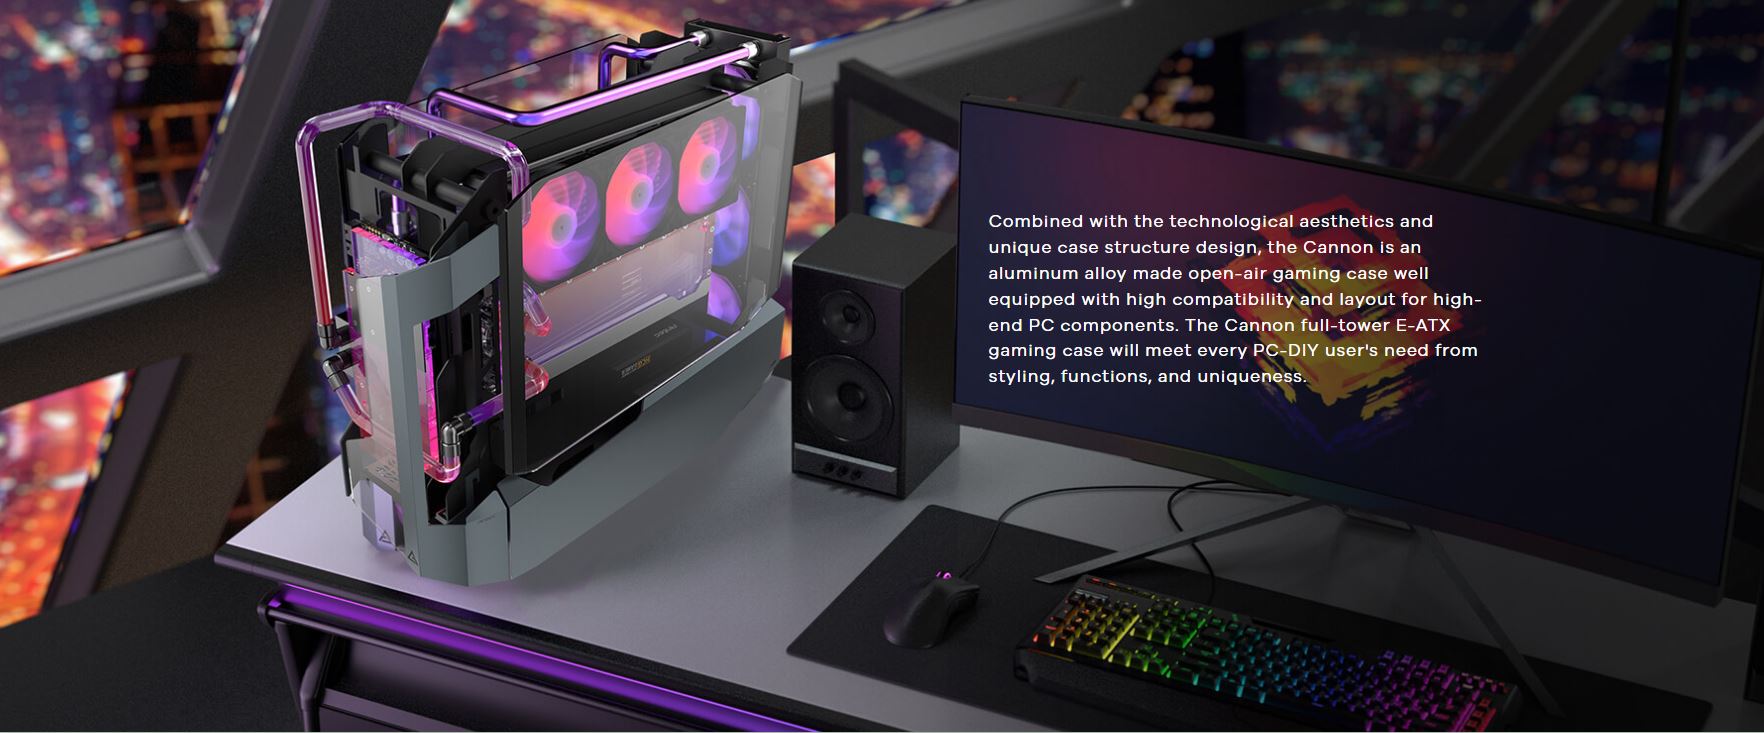 Build an Elite-Tier Dream PC System at Will